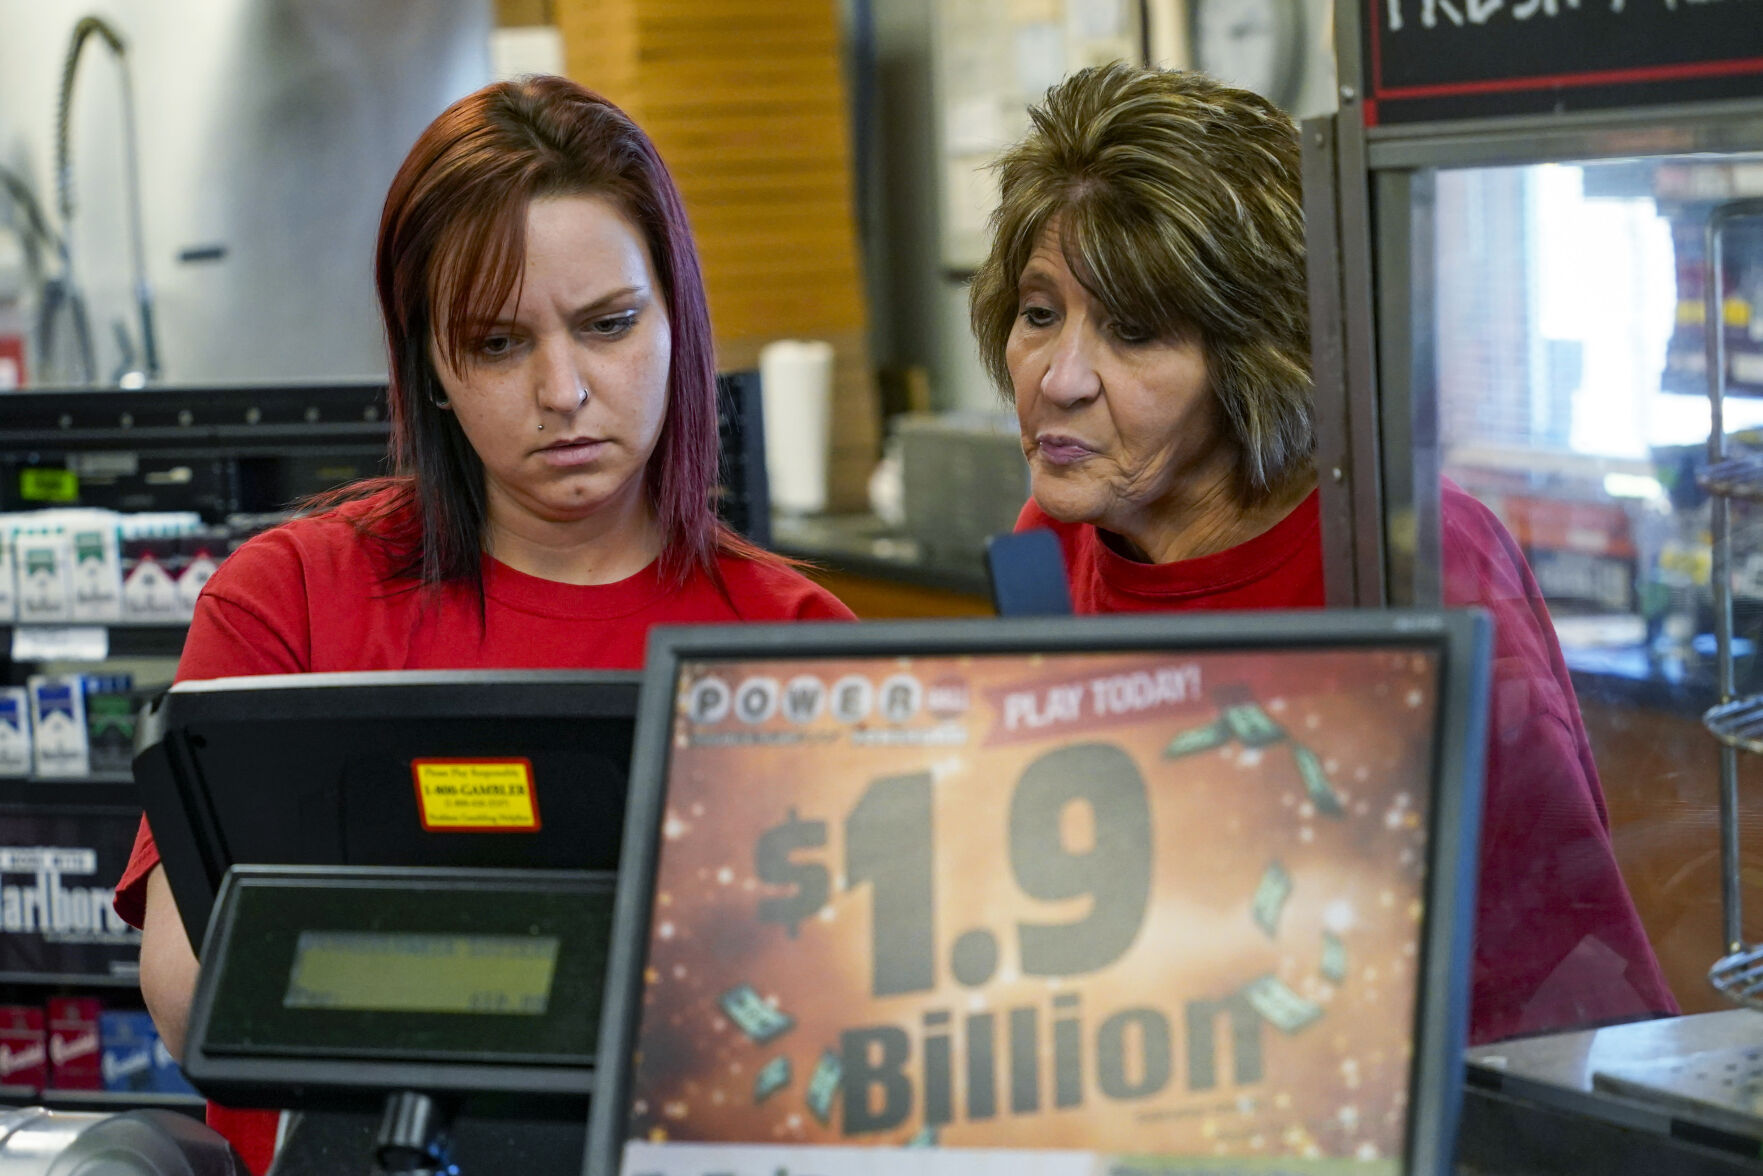 <p>Della Reminar, right, and Crystal Baptiste try to get the ticket machine to scan a card for personal selection numbers for a ticket for the Monday Powerball drawing with an annuity value of at least $1.9 billion, Monday, Nov. 7, 2022, at a convenience store in Renfrew, Pa. (AP Photo/Keith Srakocic)</p>   PHOTO CREDIT: Keith Srakocic - staff, AP